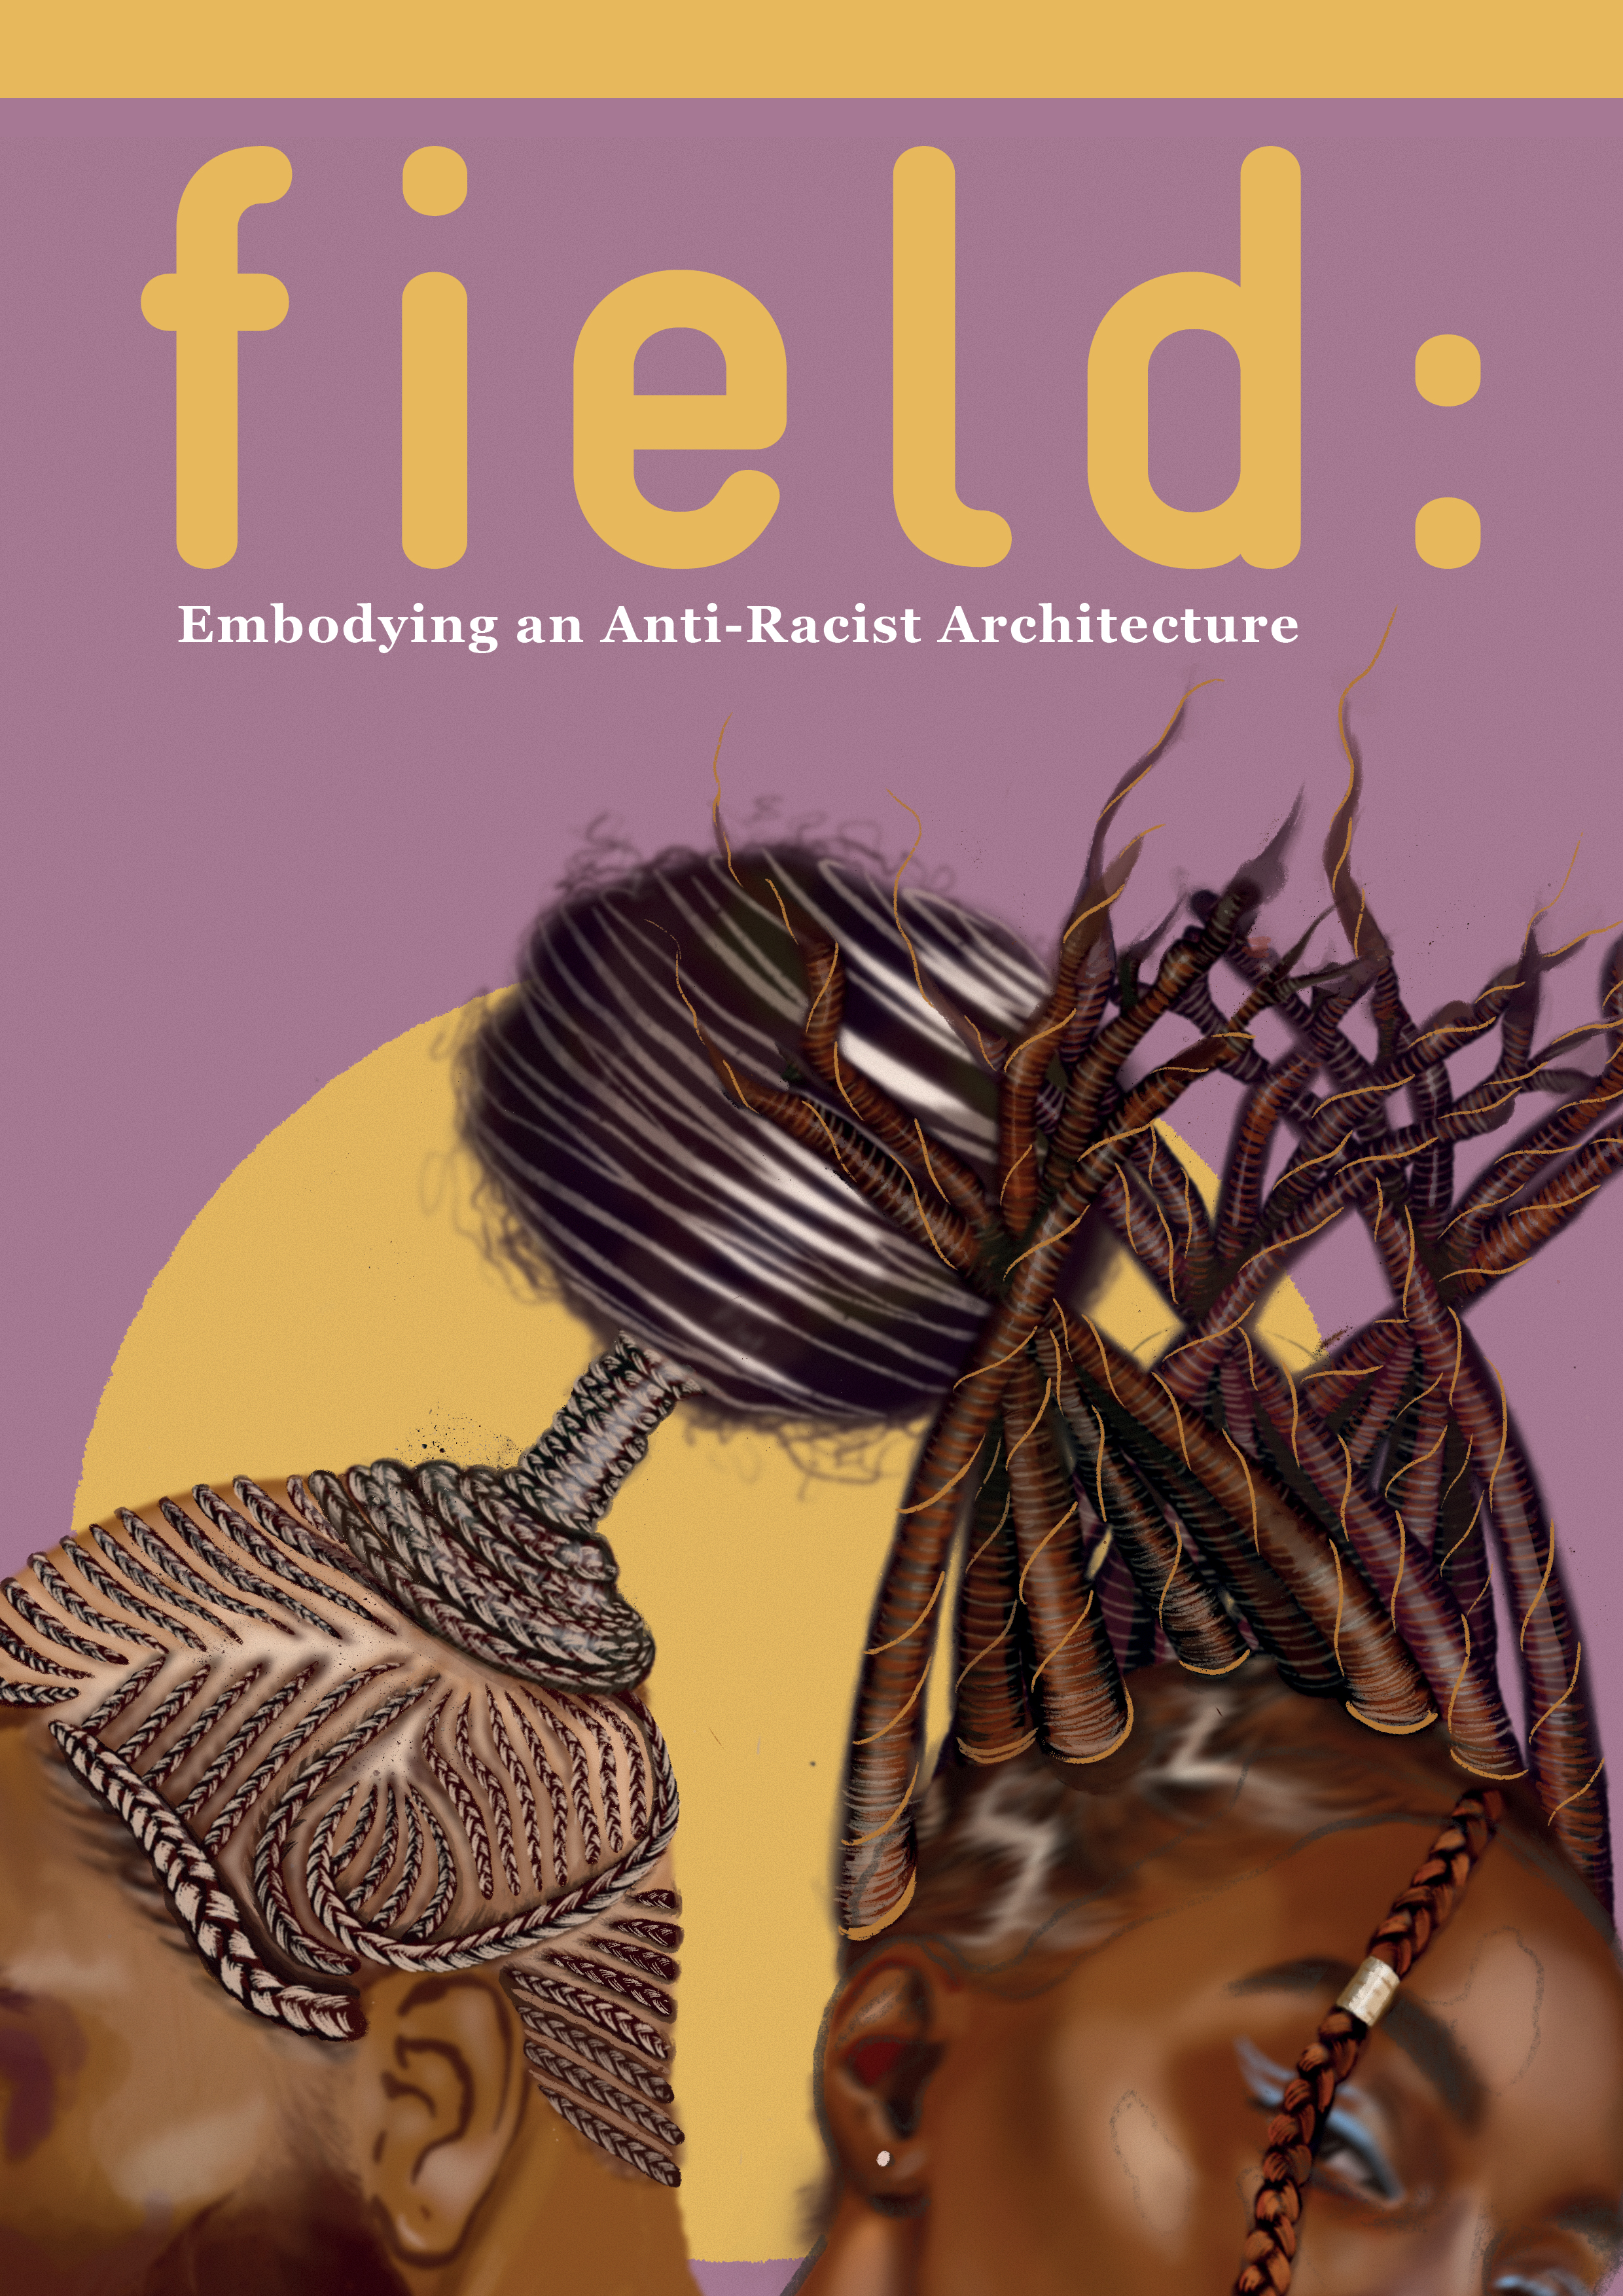 Editorial; Embodying an Anti-Racist Architecture